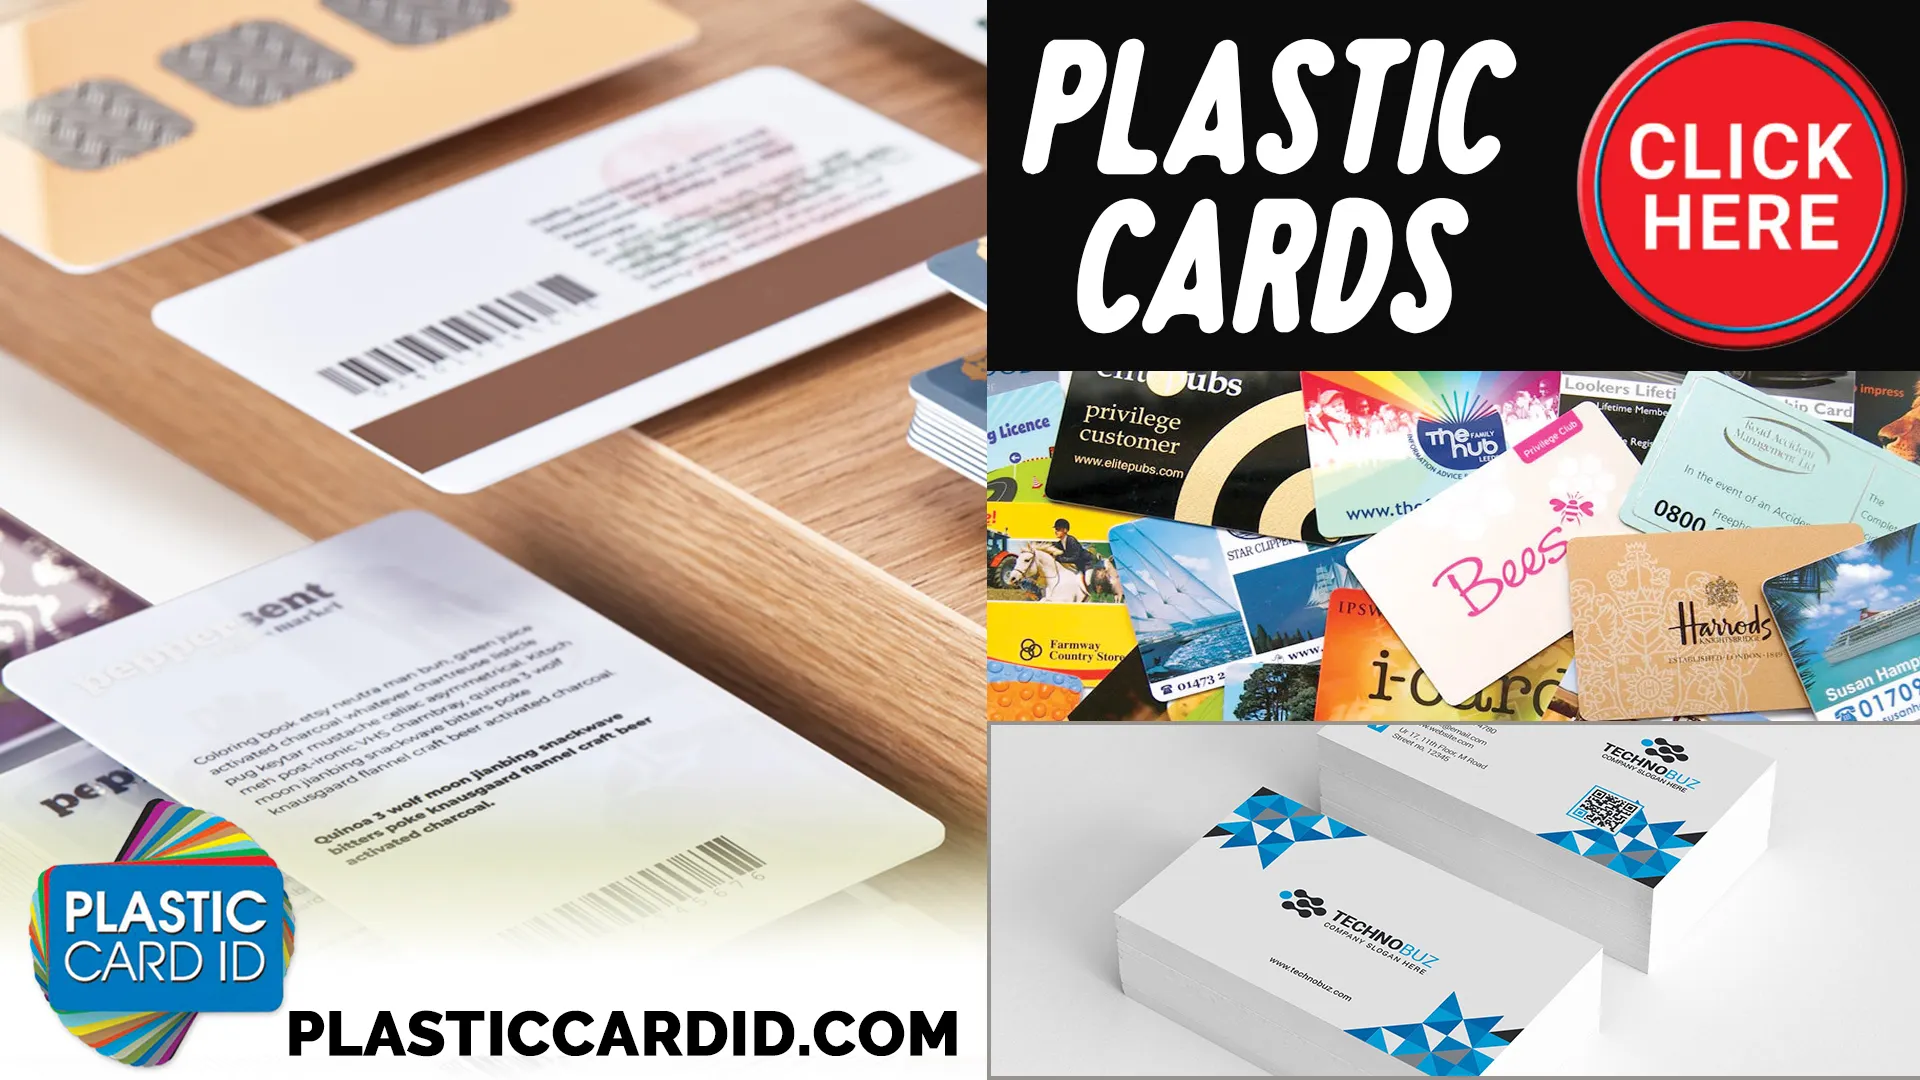 Creating Connections with PCID
: Our Cards Speak Volumes